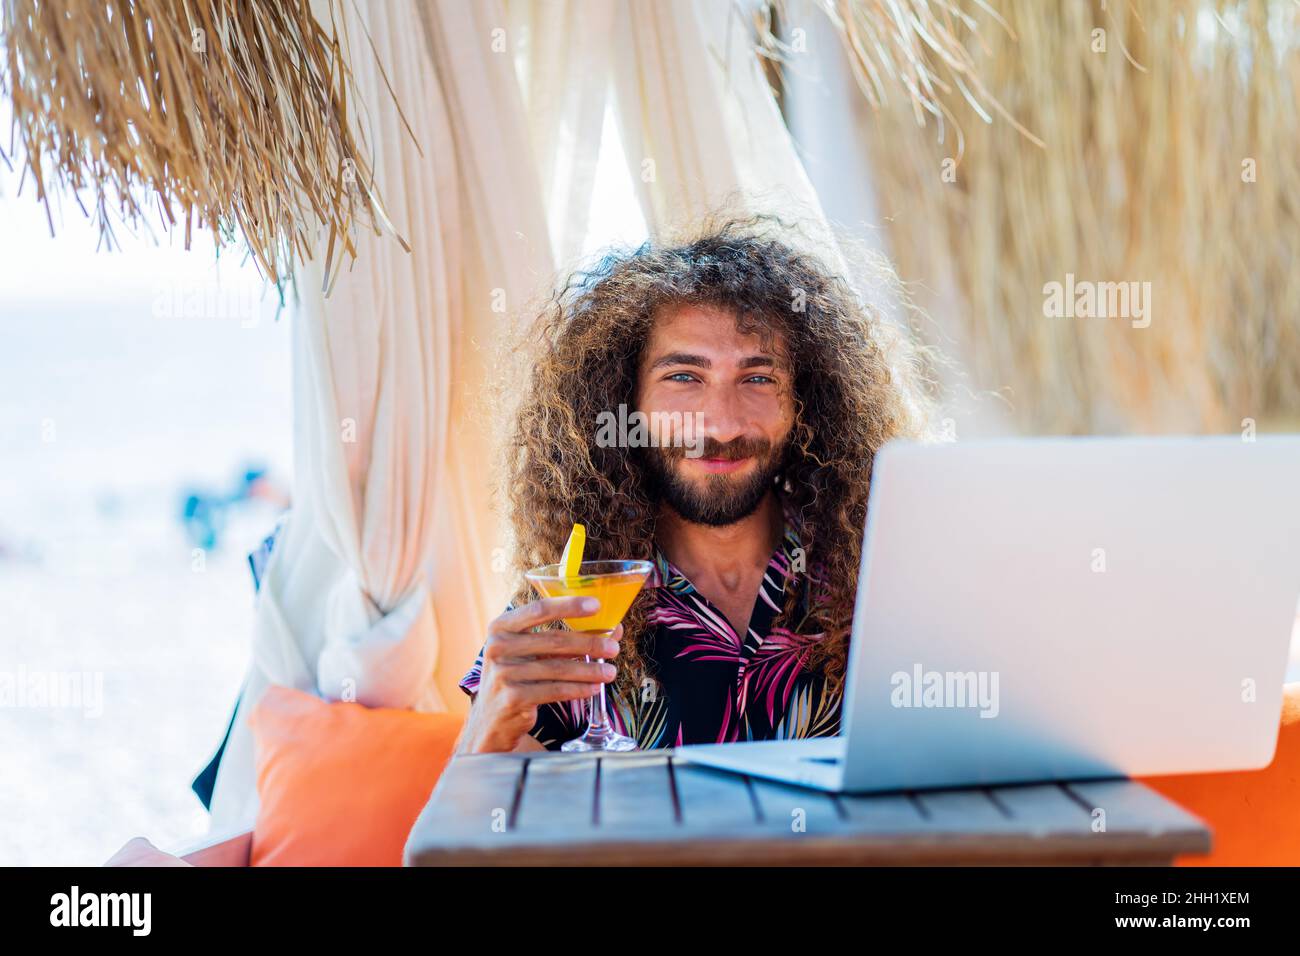 https://c8.alamy.com/comp/2HH1XEM/long-curly-haired-man-sitting-in-beach-and-working-laptop-vacation-2HH1XEM.jpg